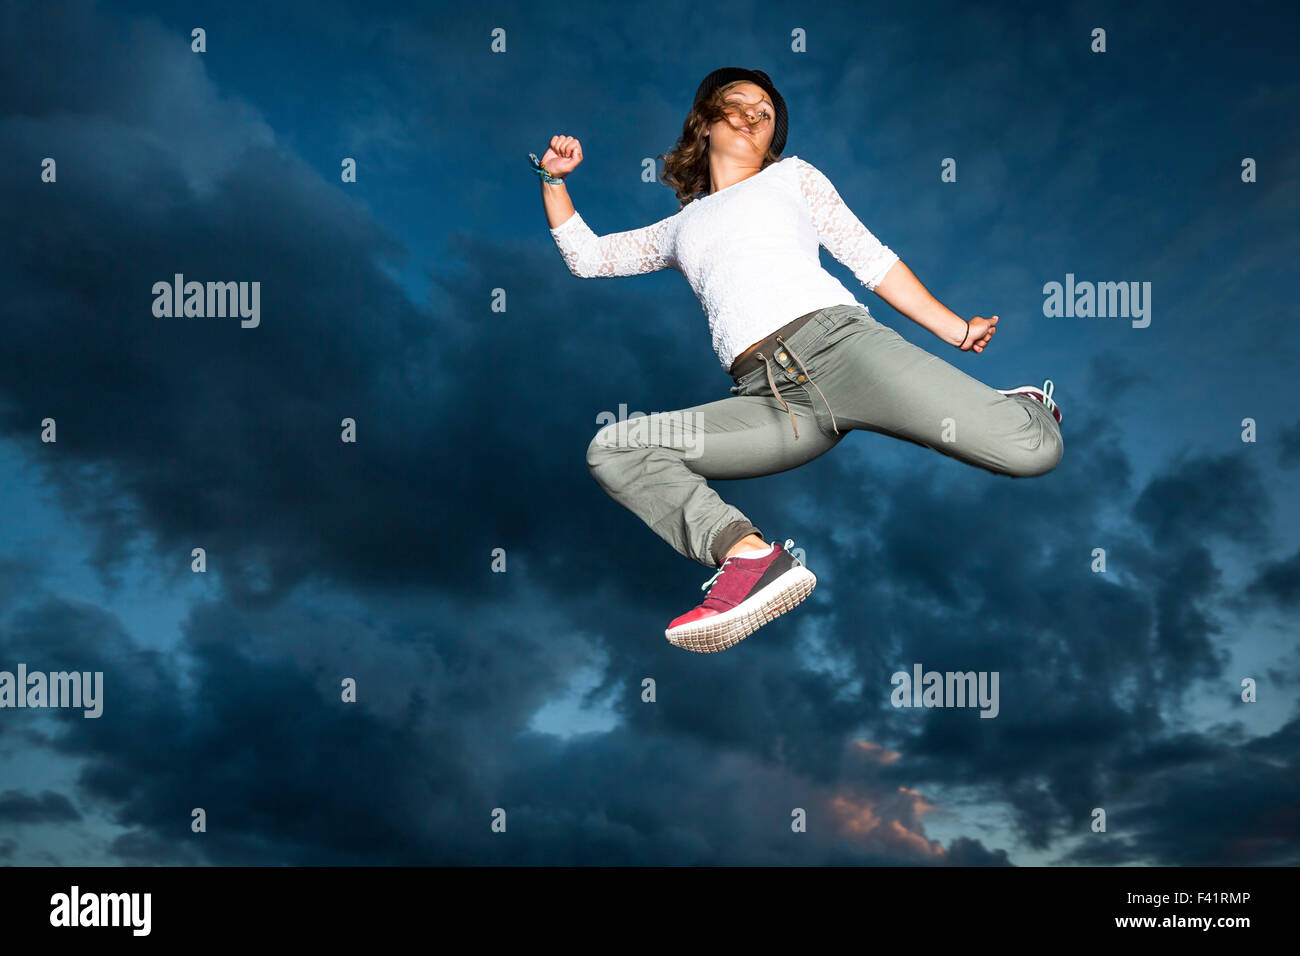 Young woman, 19 years old, jumping, in mid-air, against the evening sky Stock Photo